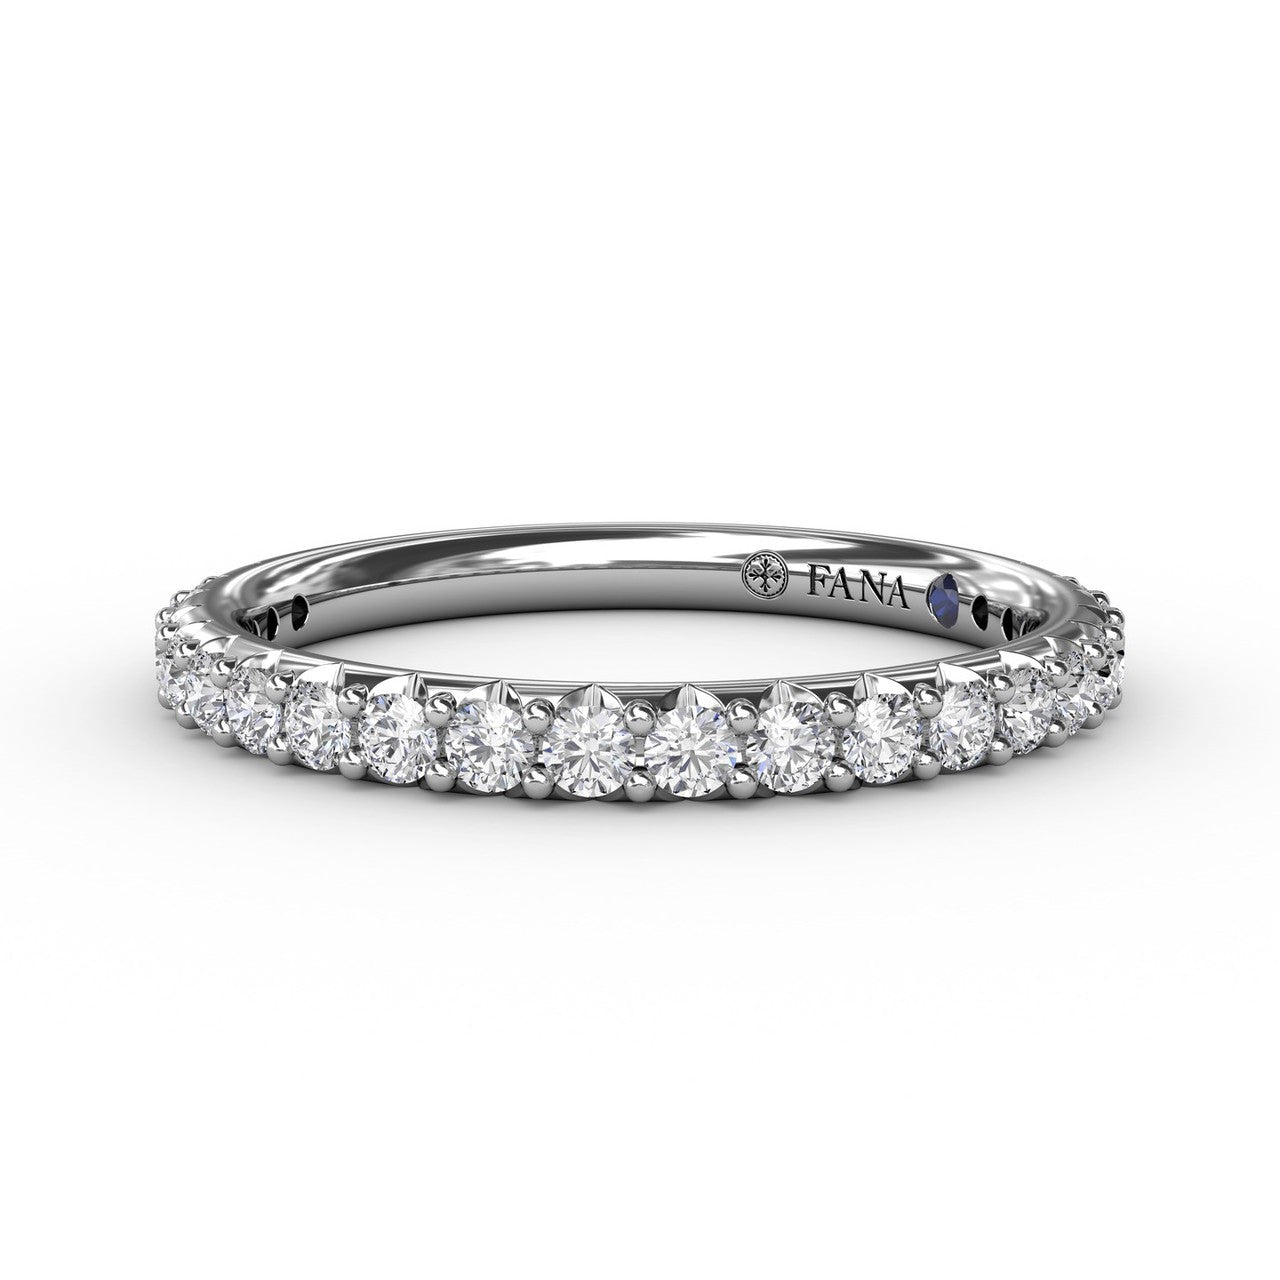 14Kt. White Gold 0.44Ctdw Natural Round Diamond Shared Prong Band Size 6.5 by Fana